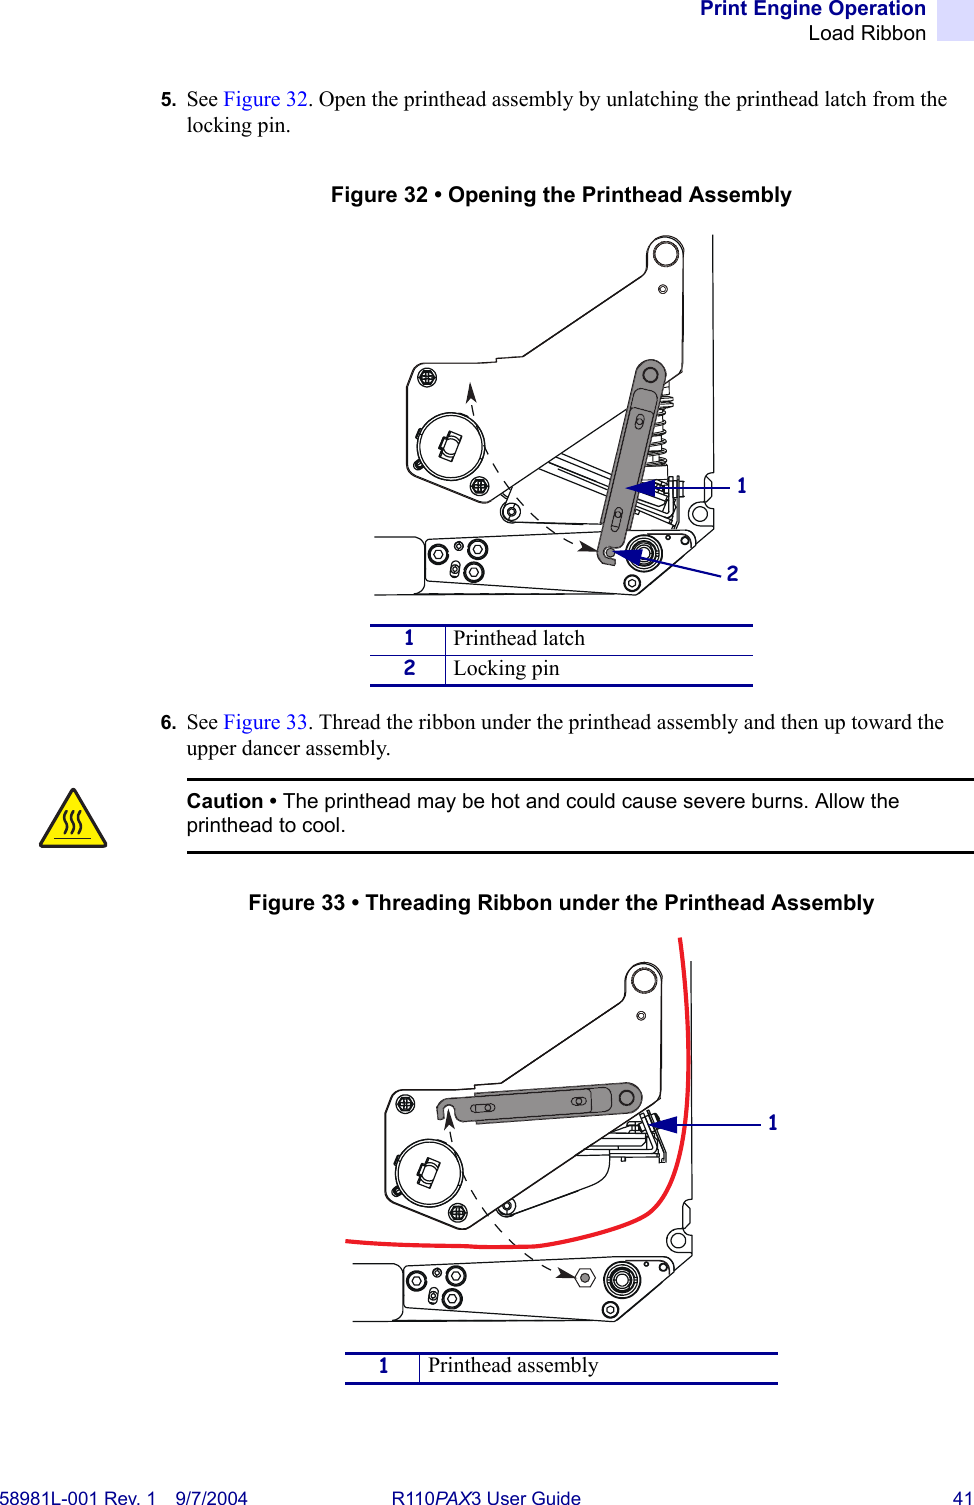 Print Engine OperationLoad Ribbon58981L-001 Rev. 1 9/7/2004 R110PAX3 User Guide 415. See Figure 32. Open the printhead assembly by unlatching the printhead latch from the locking pin.Figure 32 • Opening the Printhead Assembly6. See Figure 33. Thread the ribbon under the printhead assembly and then up toward the upper dancer assembly.Figure 33 • Threading Ribbon under the Printhead Assembly1Printhead latch2Locking pinCaution • The printhead may be hot and could cause severe burns. Allow the printhead to cool.1  Printhead assembly121